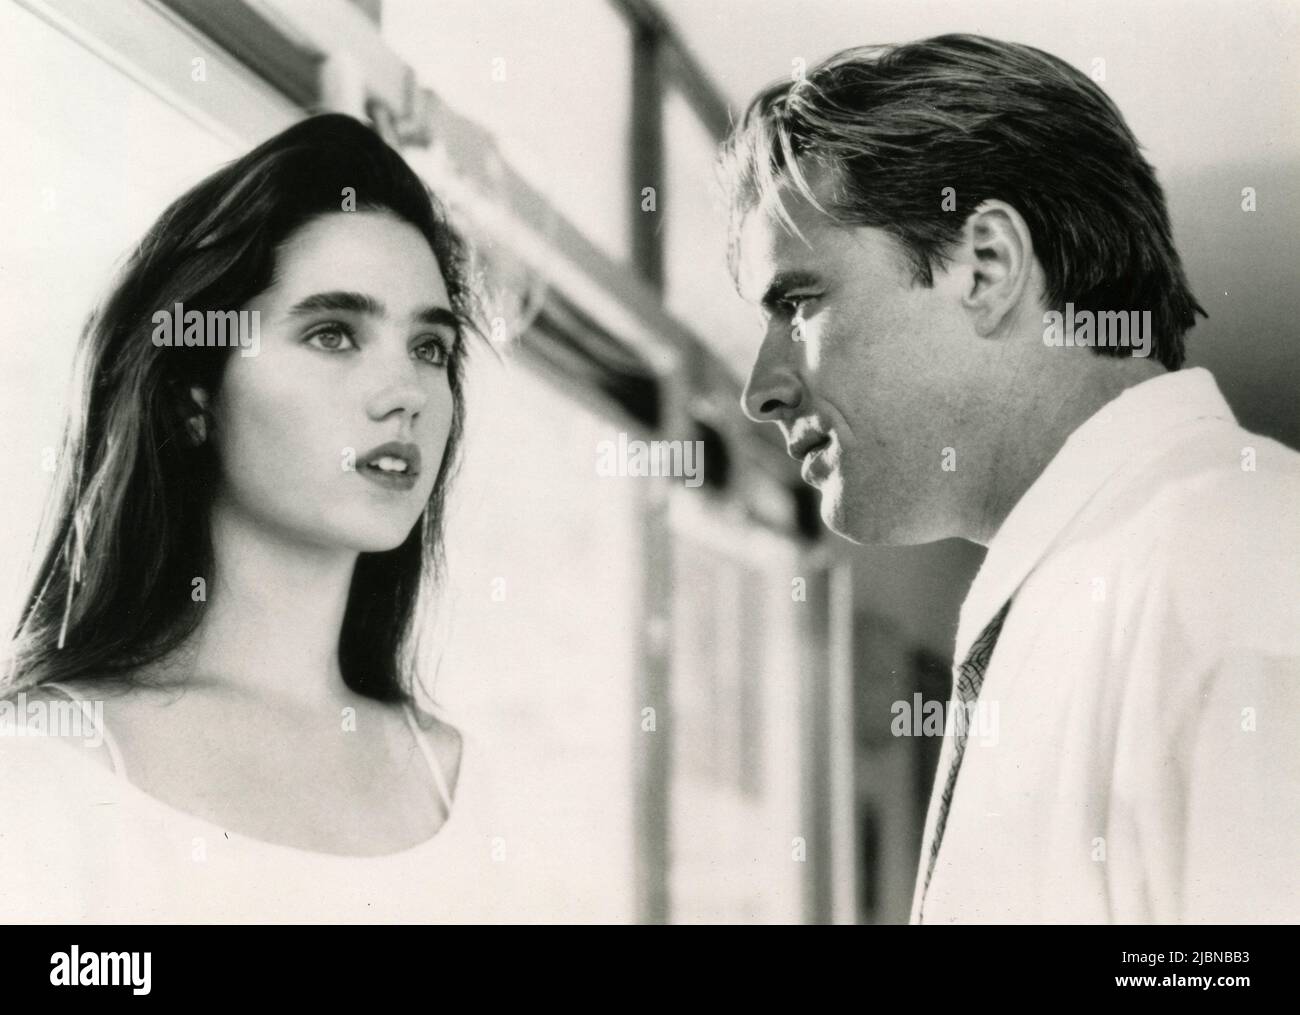 American actress Jennifer Connelly and actor Don Johnson in the movie The Hot Spot, USA 1990 Stock Photo